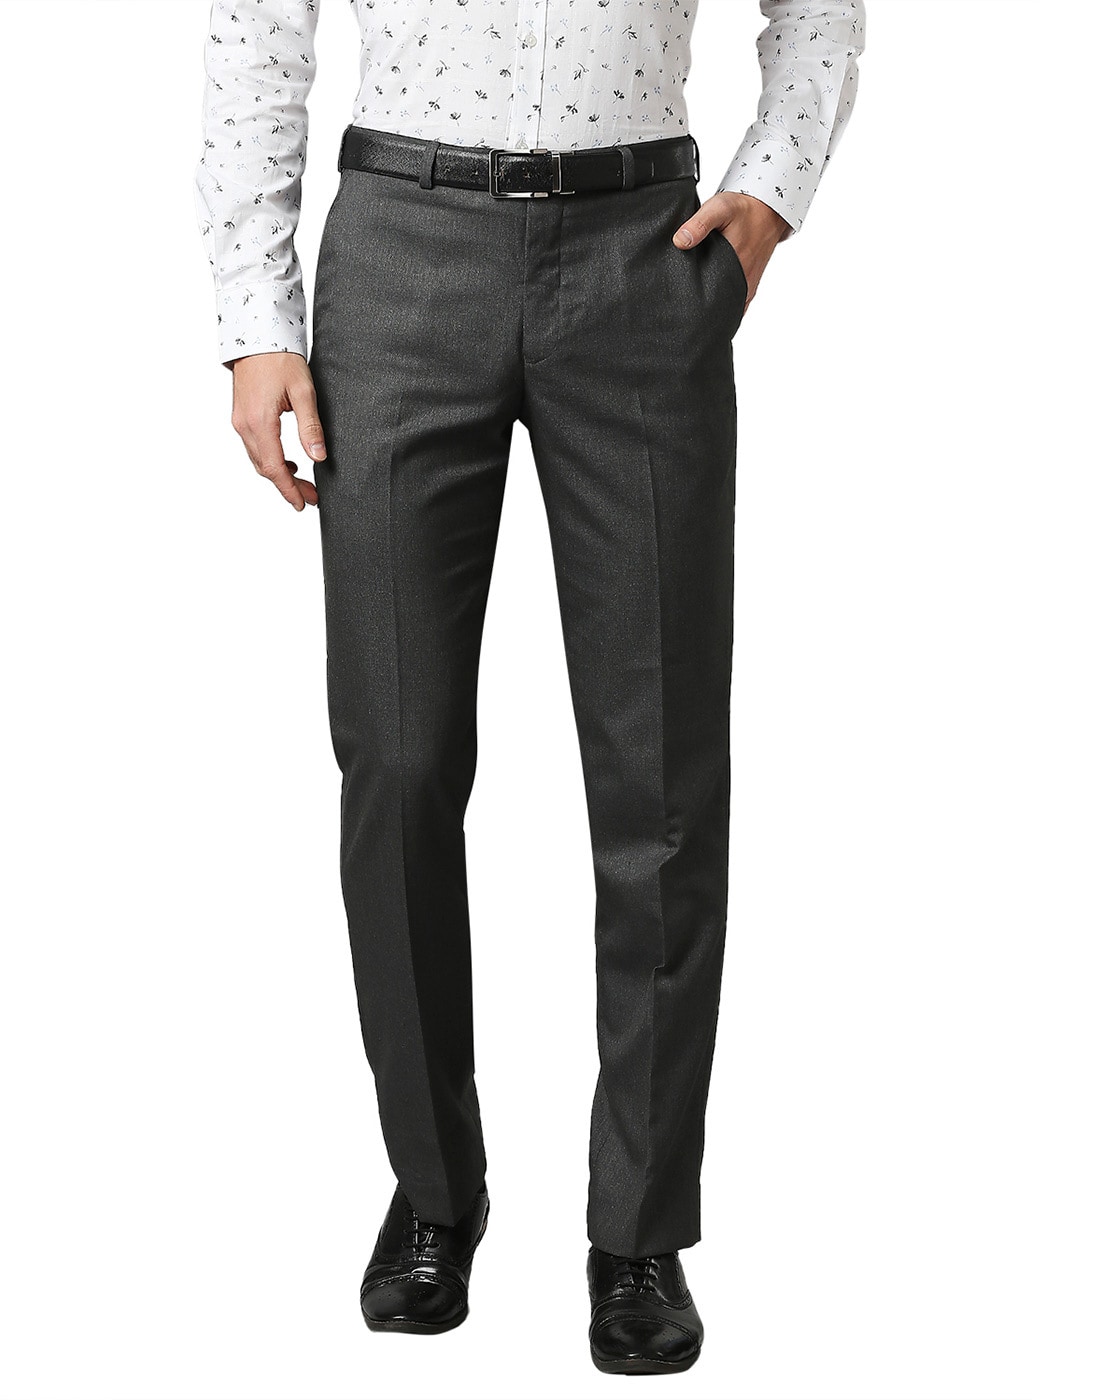 park avenue mens skinny fit formal trousers at Best Price  1559 with many  options Only in India at MartAvenuecom  Mart Avenue  MartAvenue